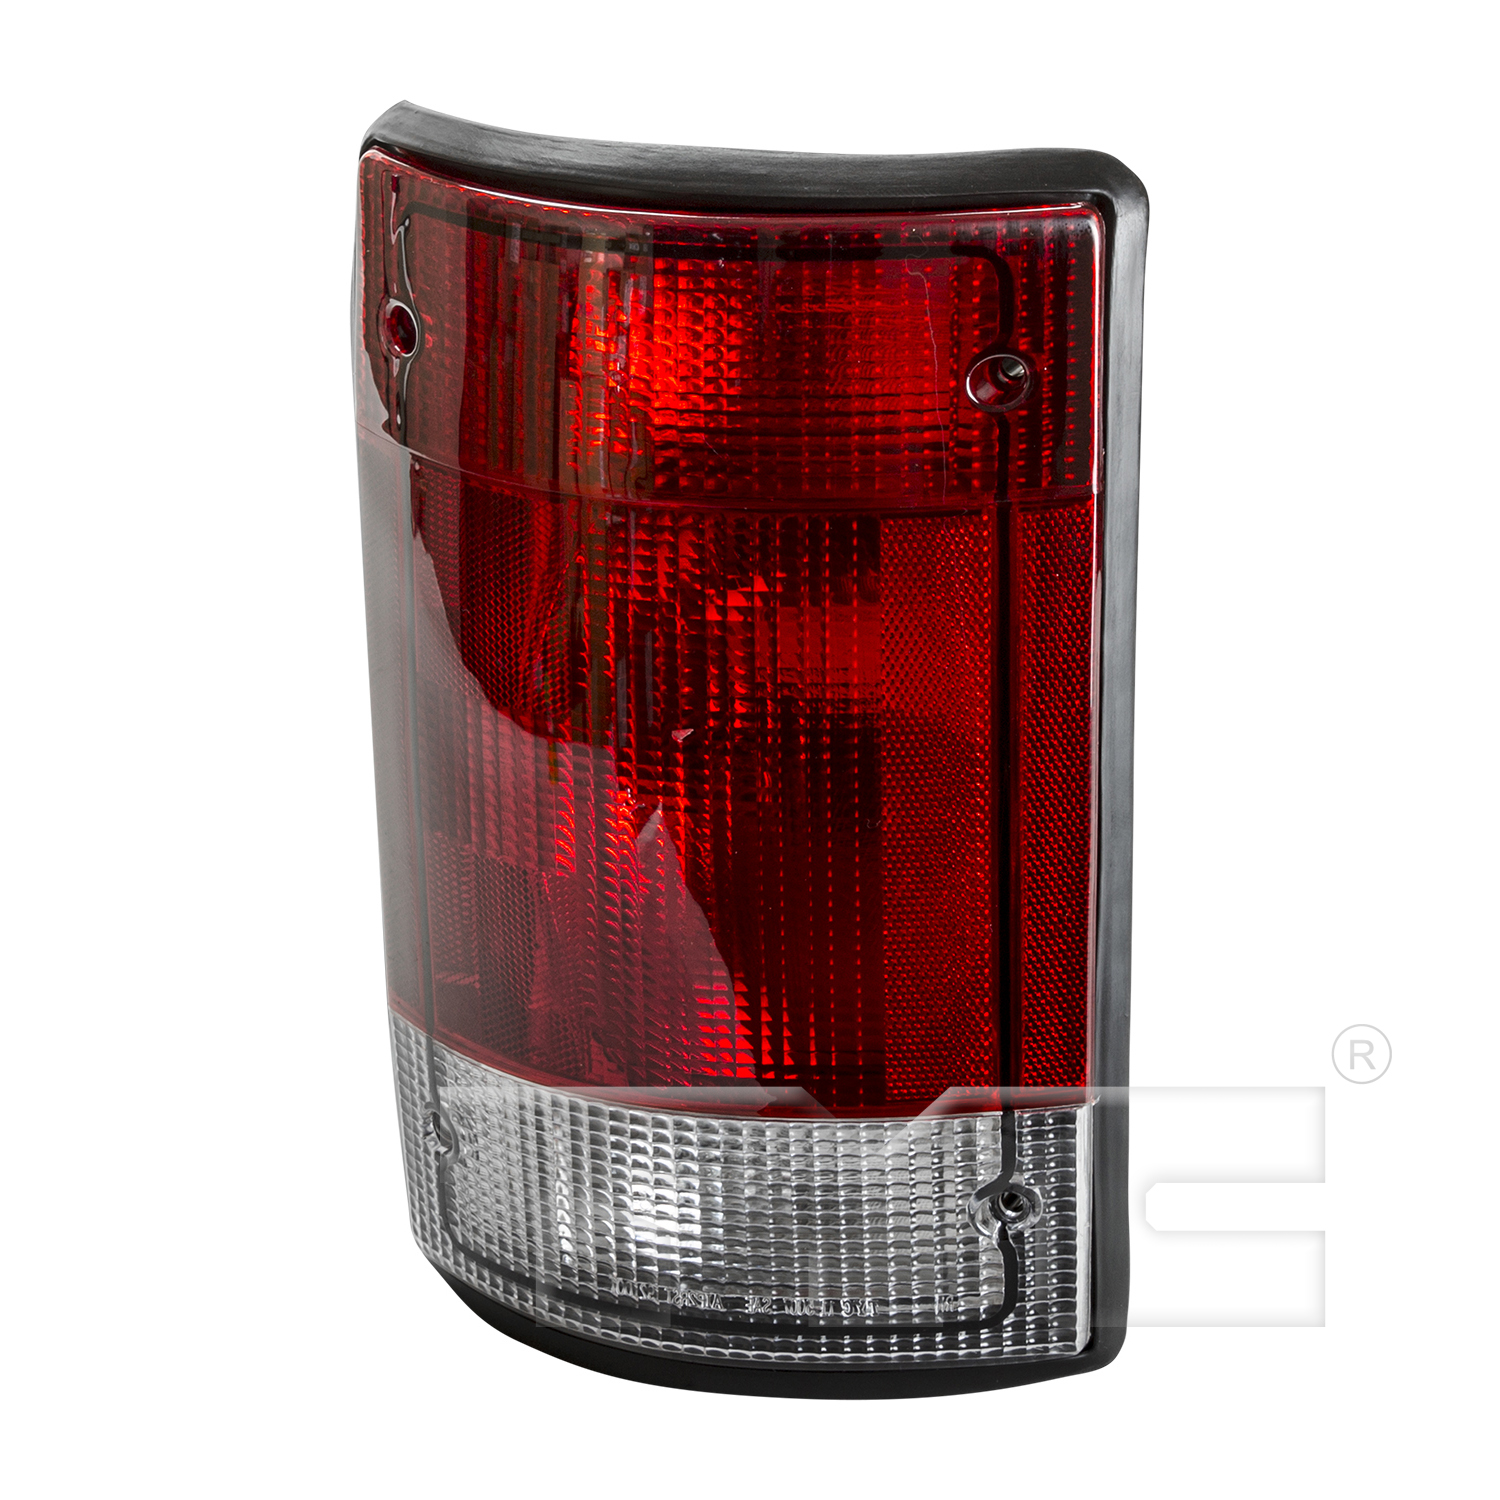 Aftermarket TAILLIGHTS for FORD - E-150 CLUB WAGON, E-150 CLUB WAGON,04-05,LT Taillamp assy